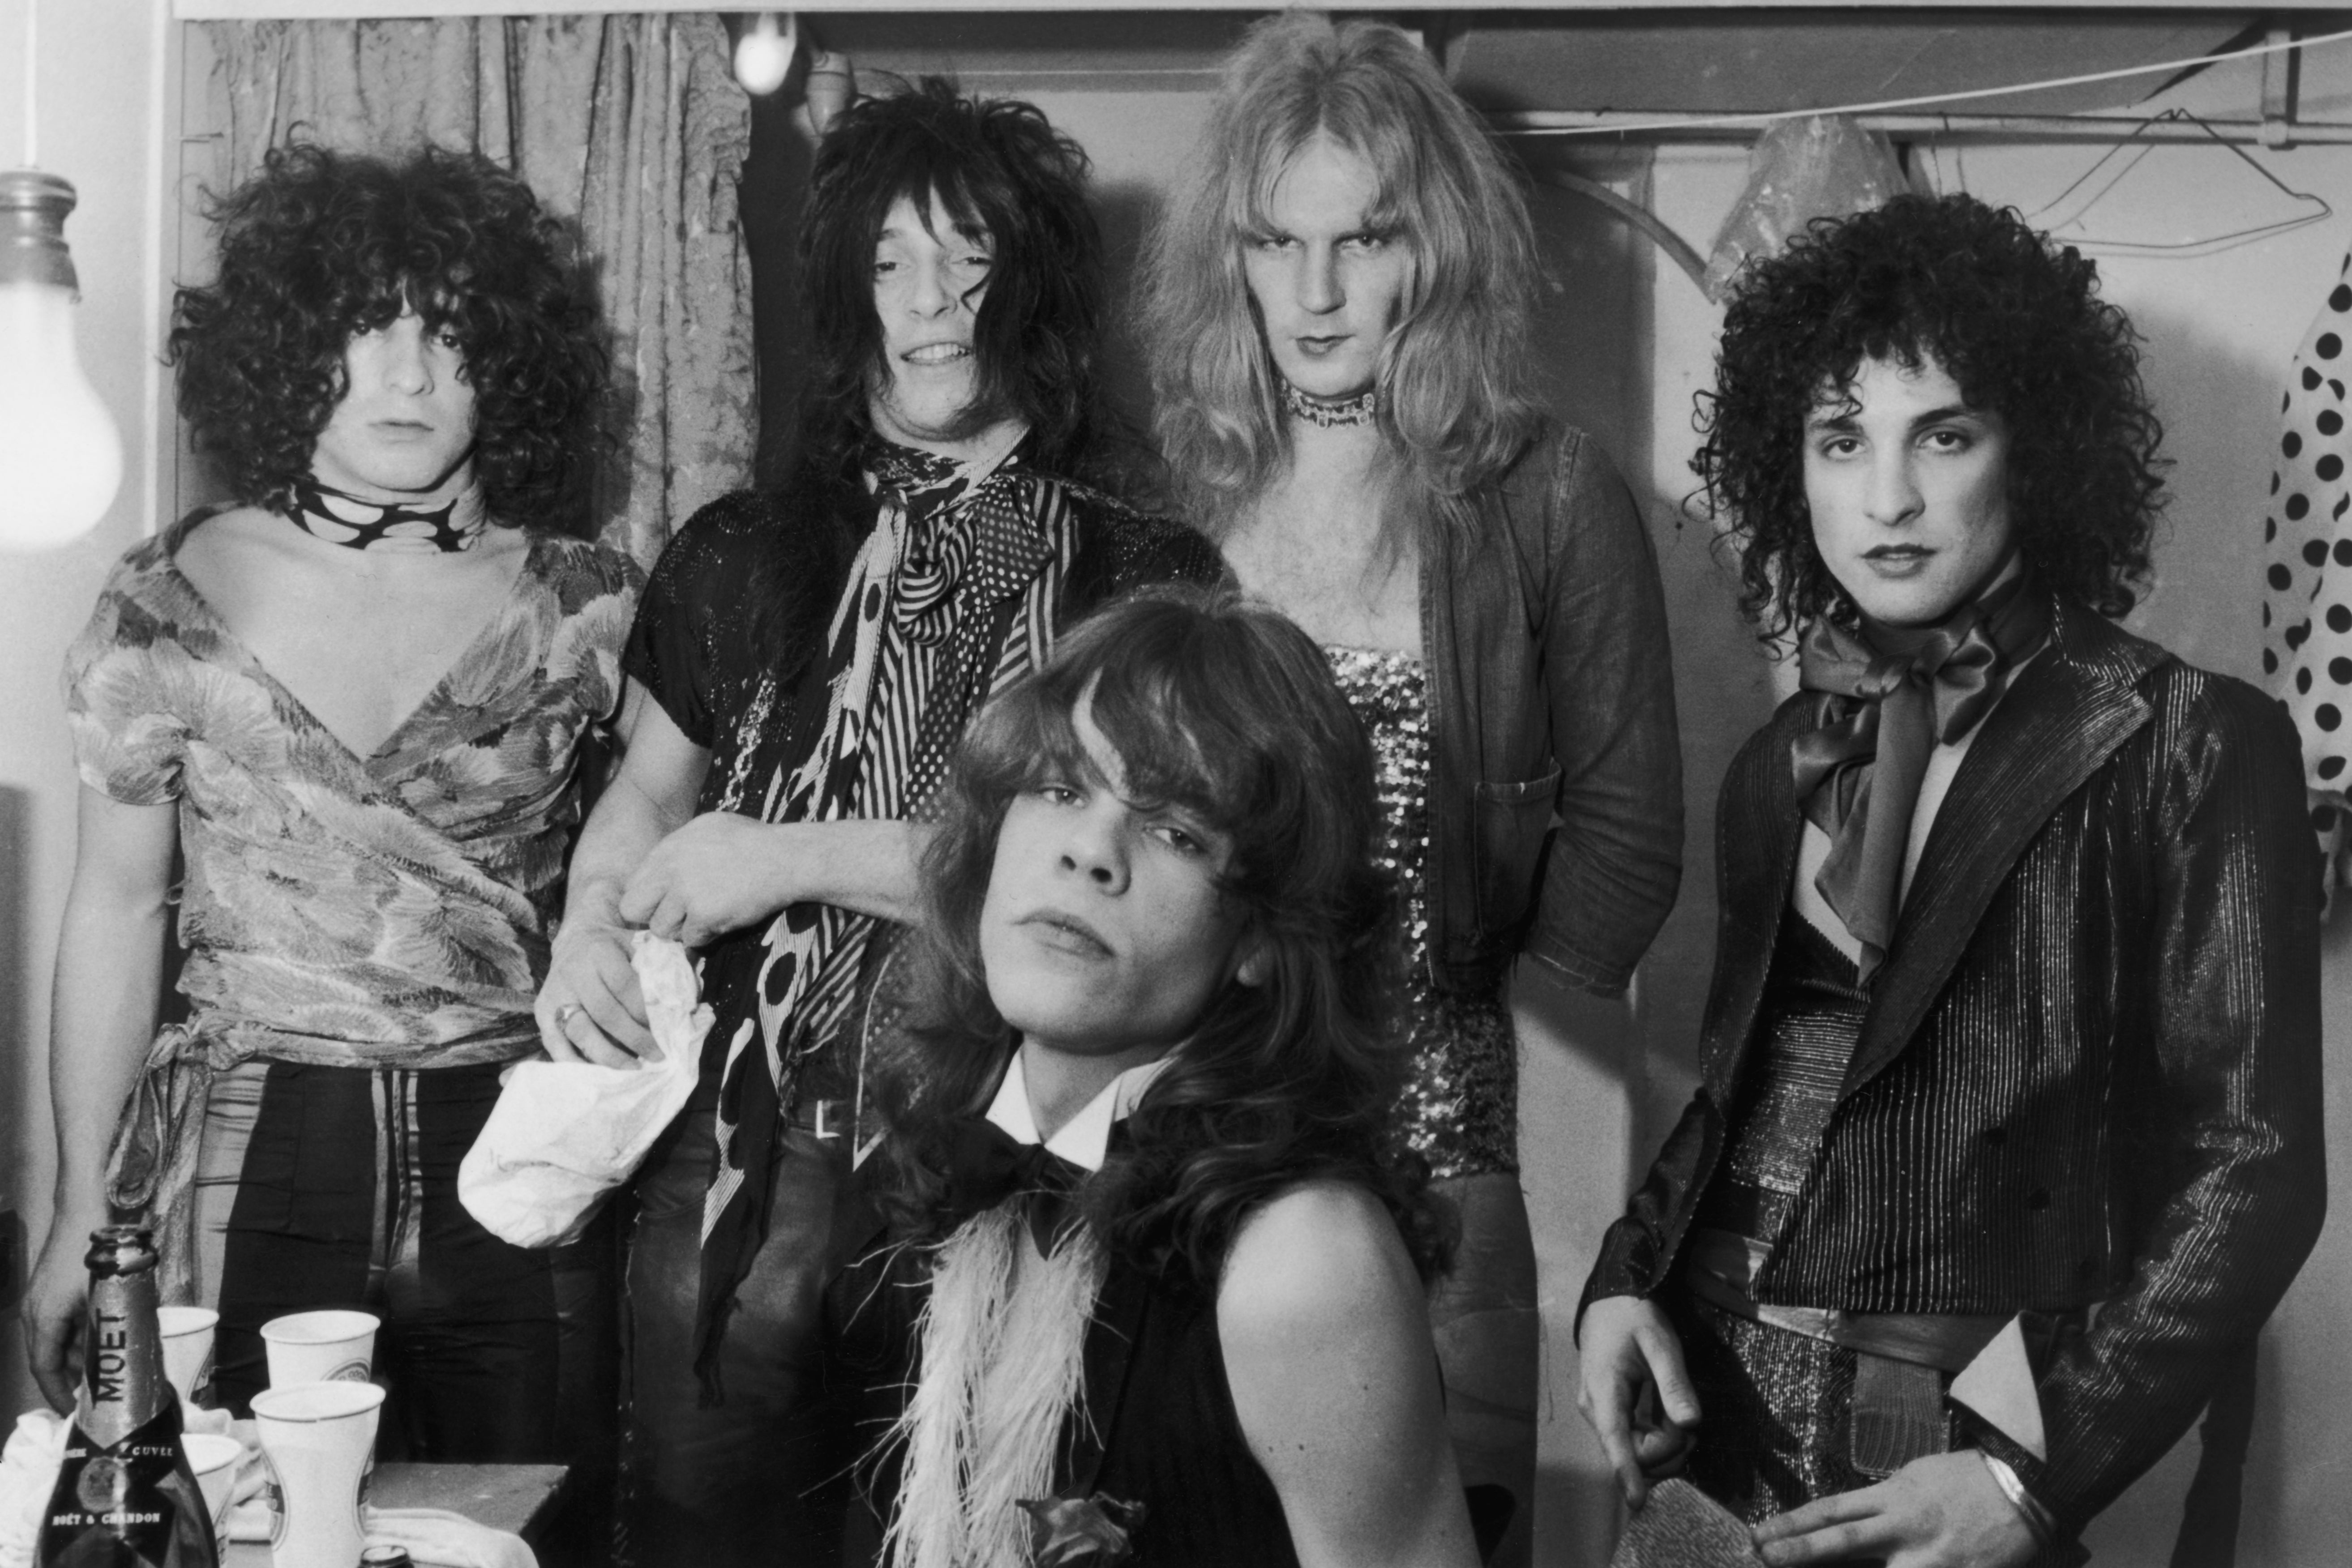 Sylvain (right) with the New York Dolls in 1972